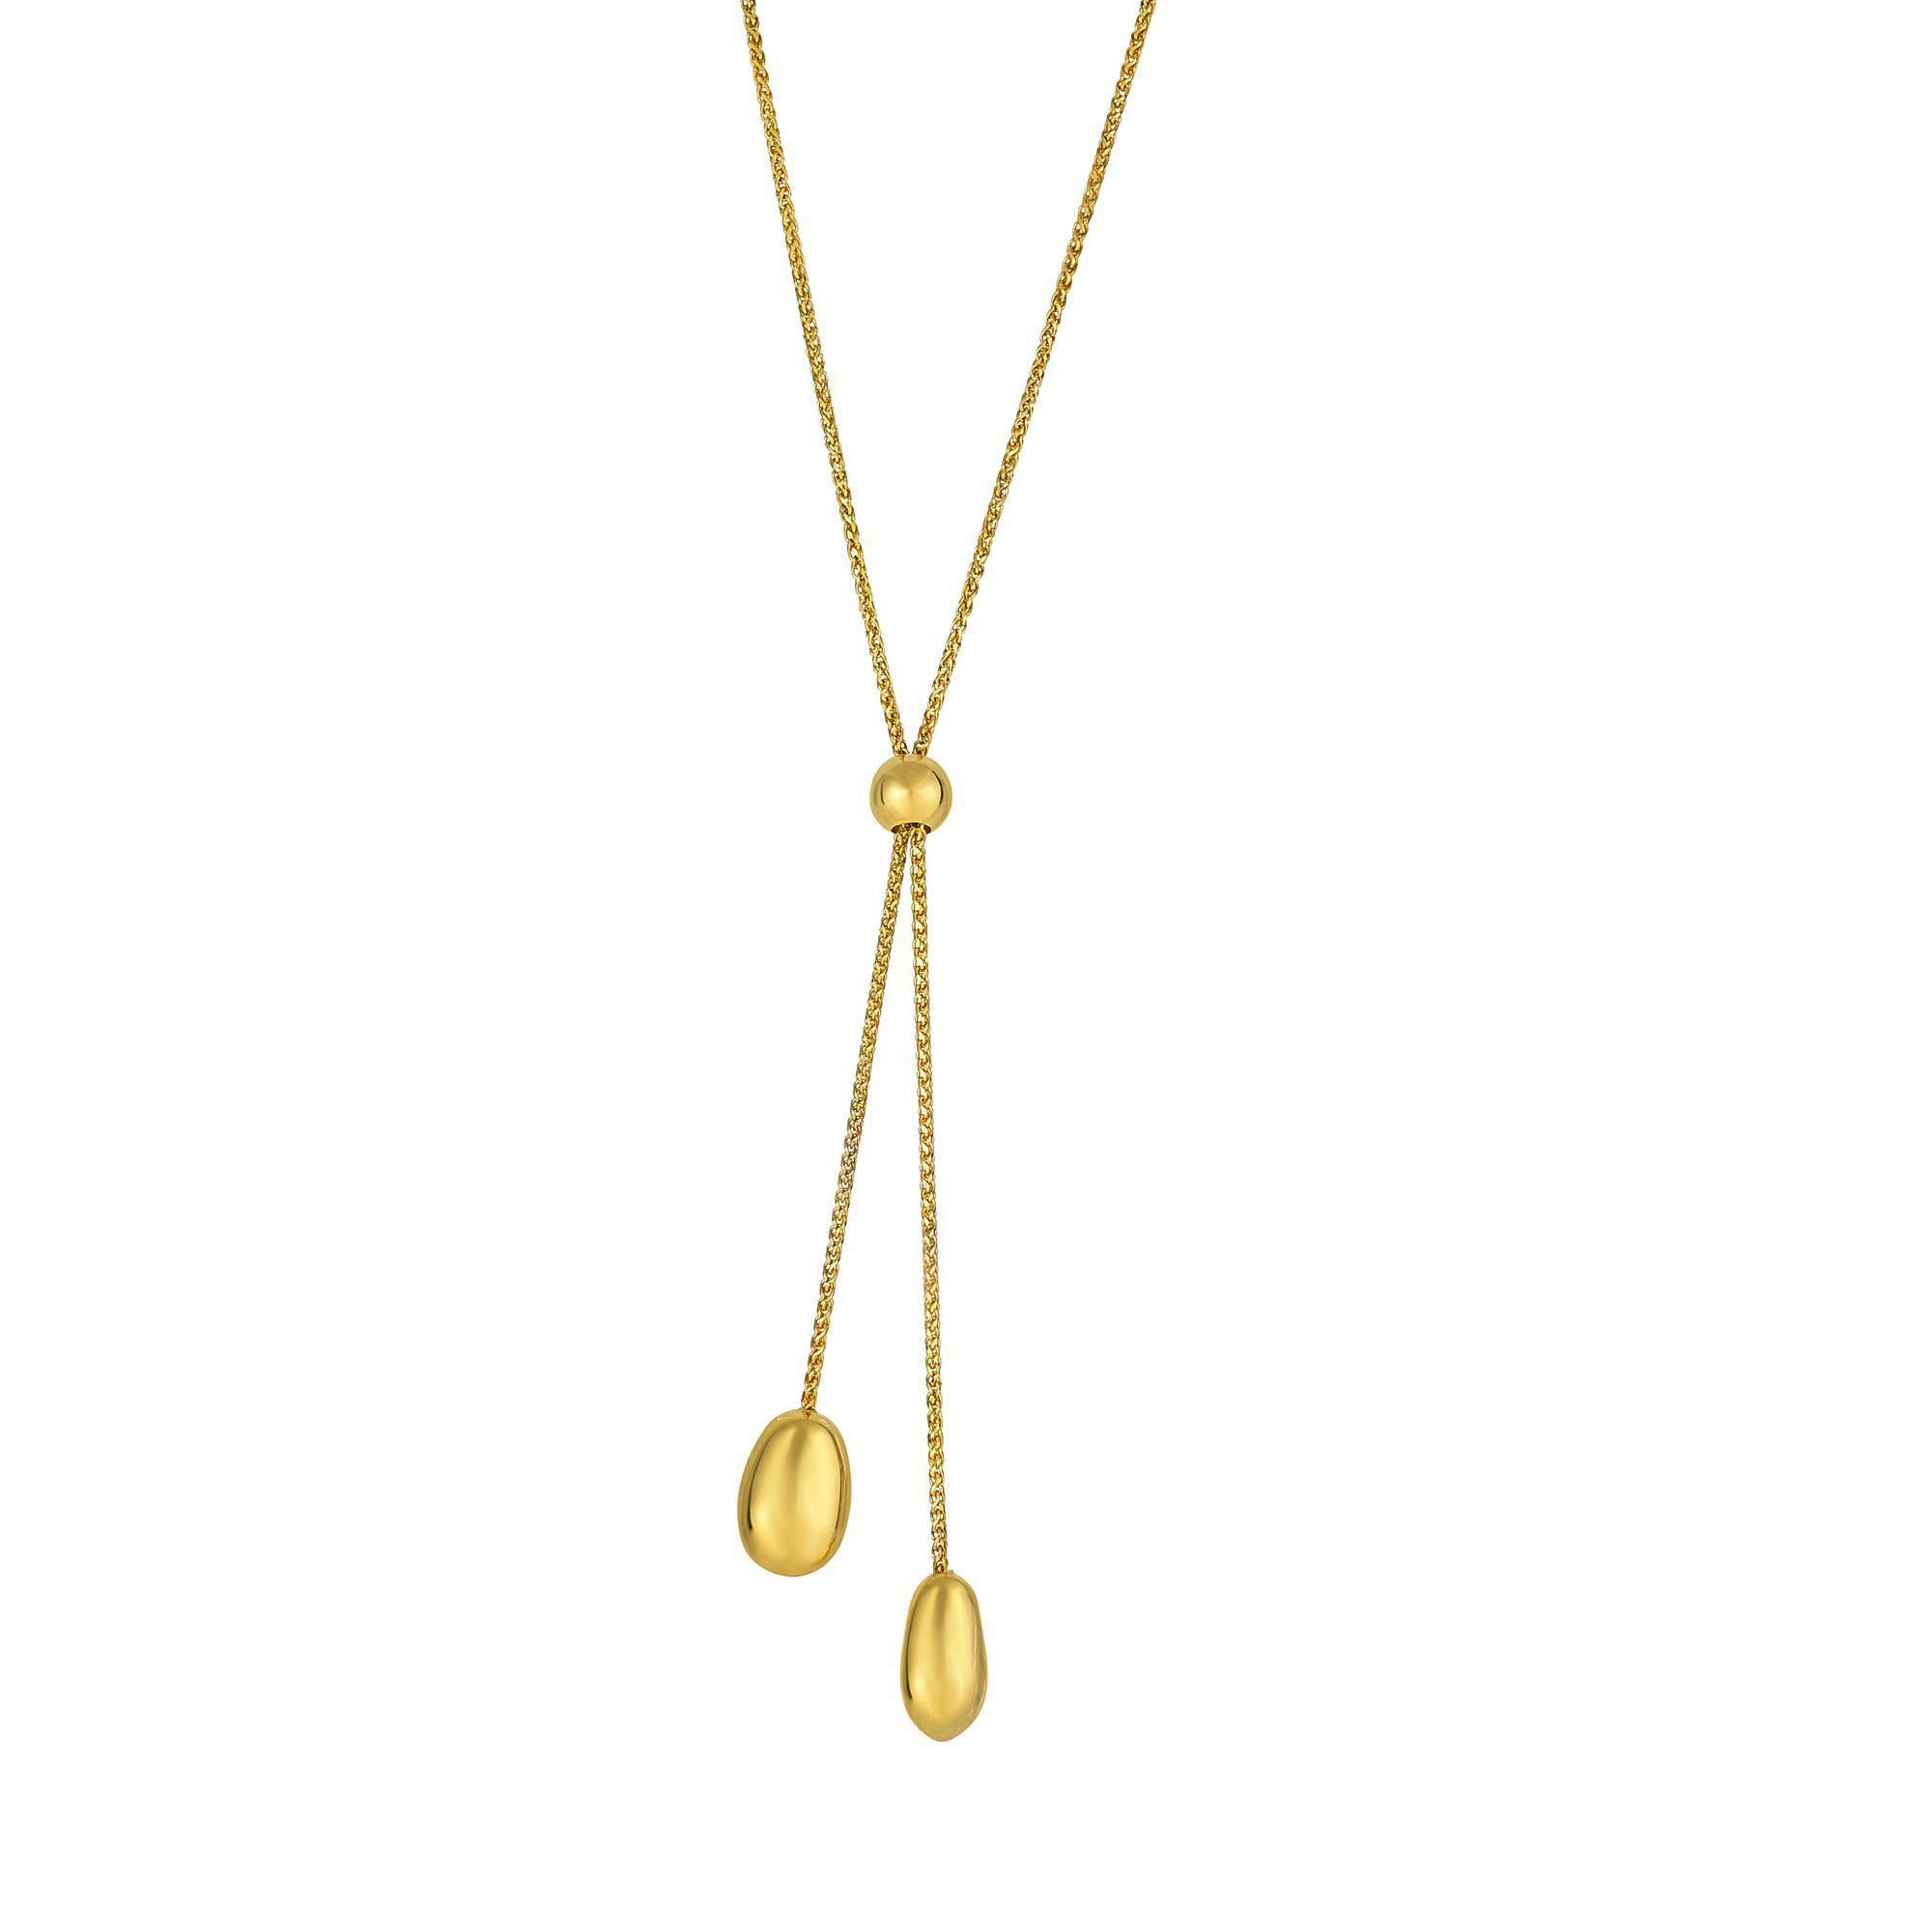 14k Yellow Gold Lariet Style Necklace, 24" fine designer jewelry for men and women